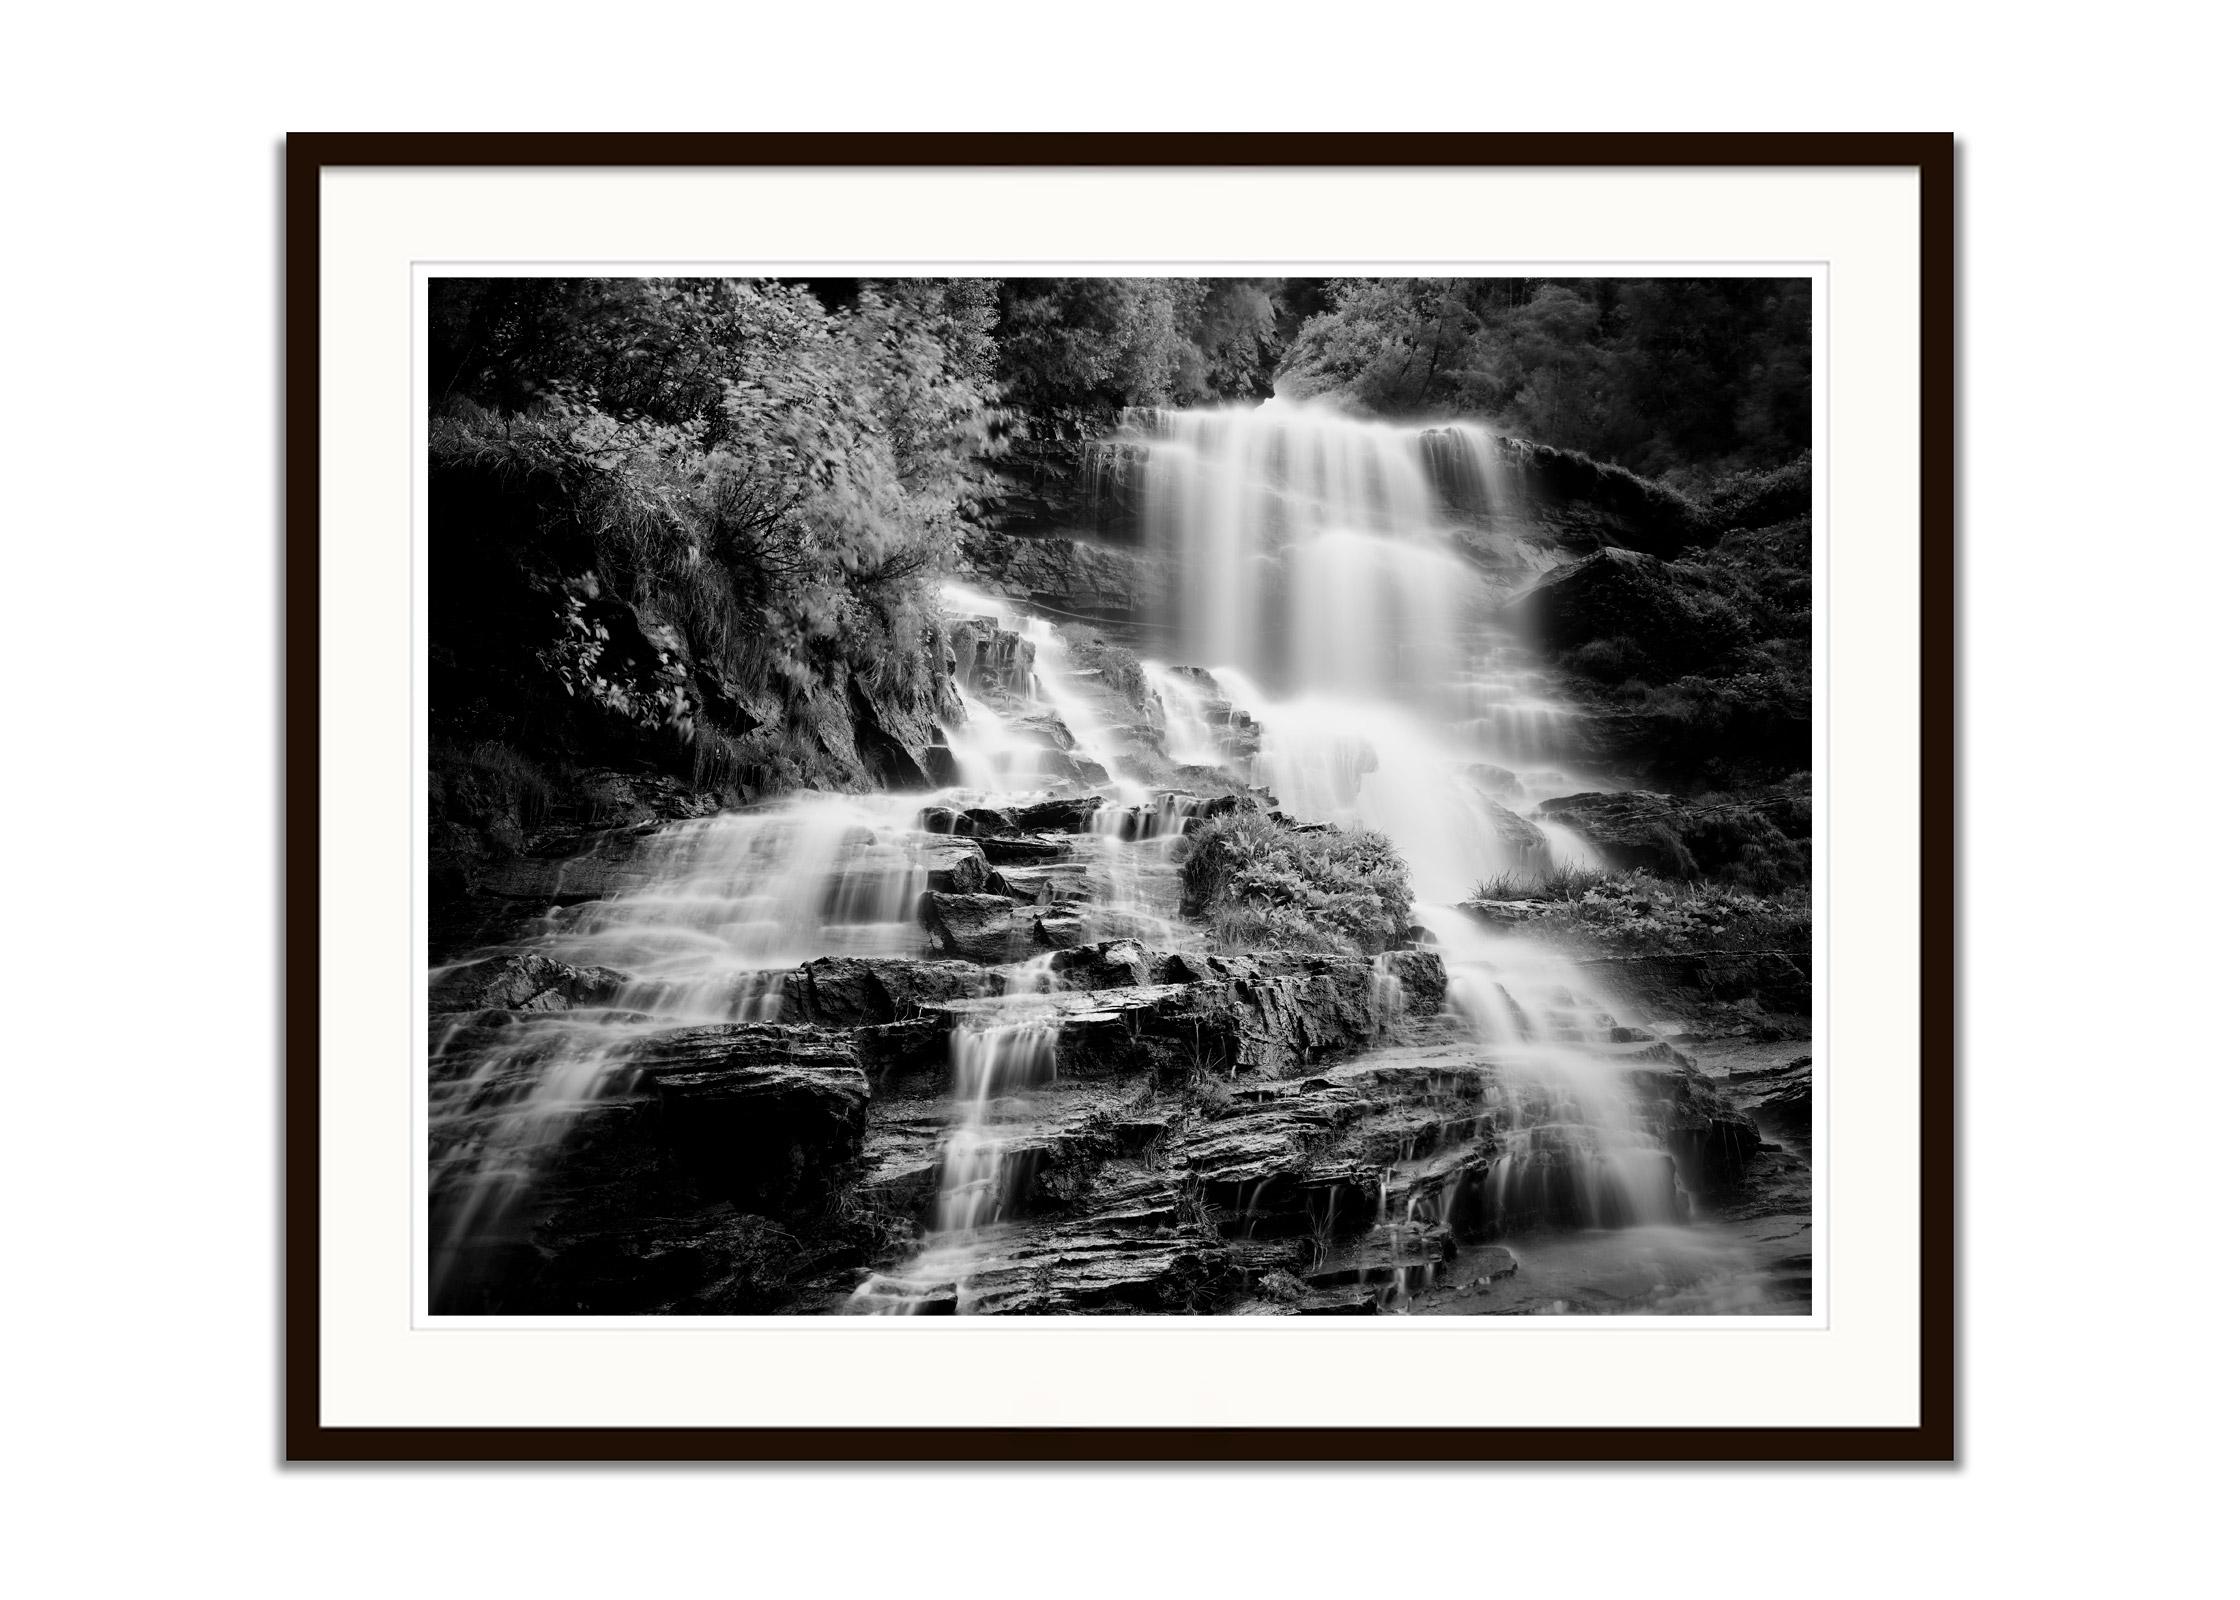 Black and white fine art long exposure waterscape - landscape photography. Waterfall detail from the beautiful Klockelefall, Pitztal, Austria. Archival pigment ink print as part of a limited edition of . All Gerald Berghammer prints are made to